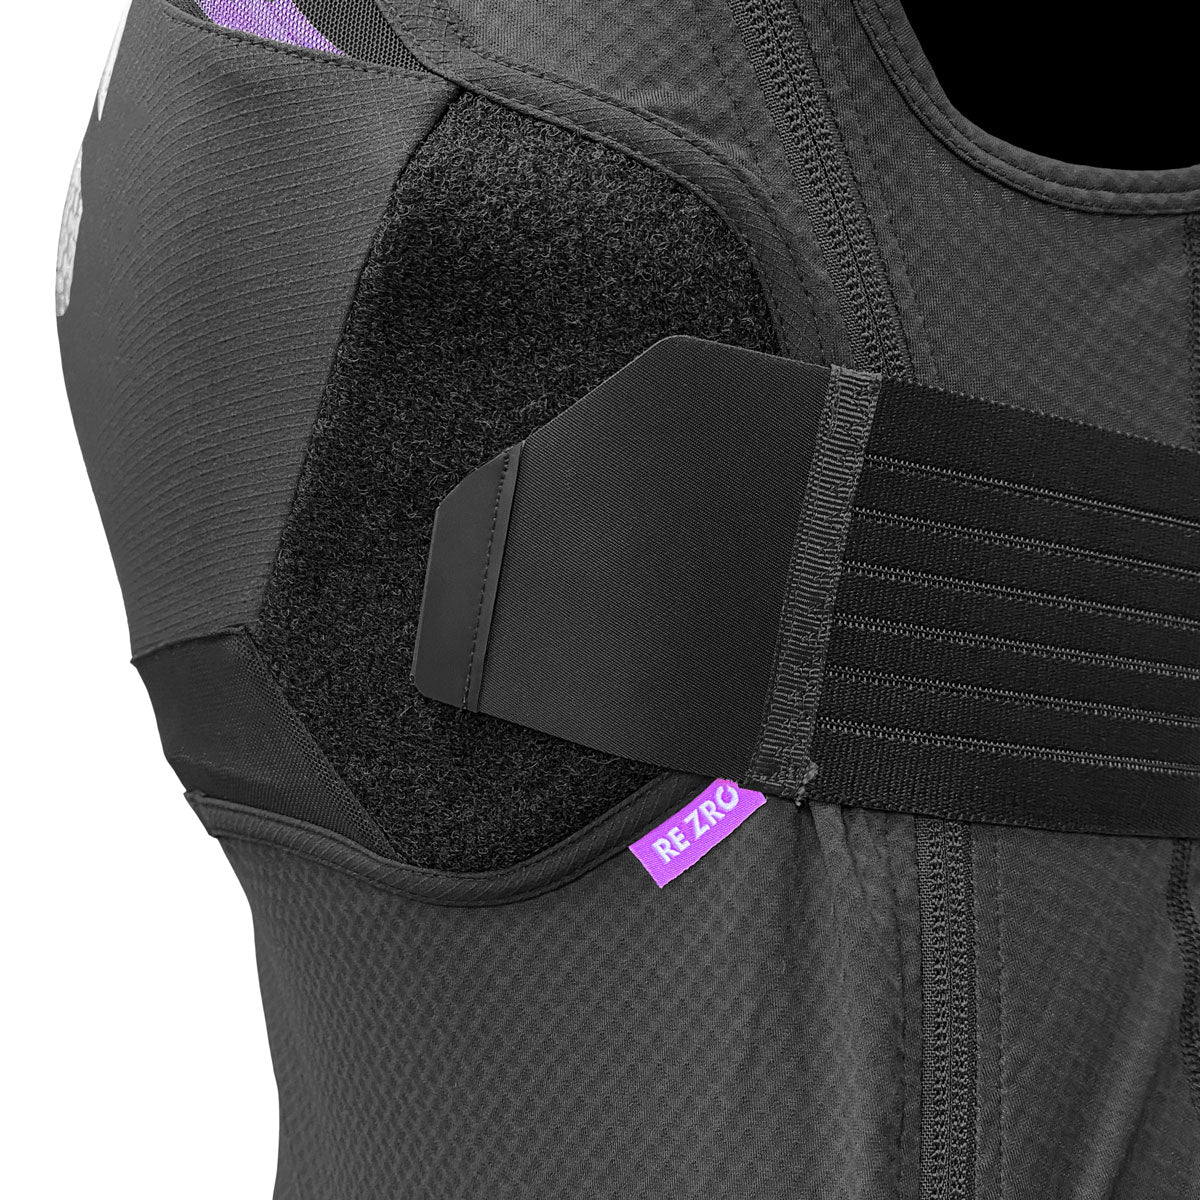 MX Spike Protective Back and Chest Shirt for Moto, Mountain Biking, Gravity Product Image